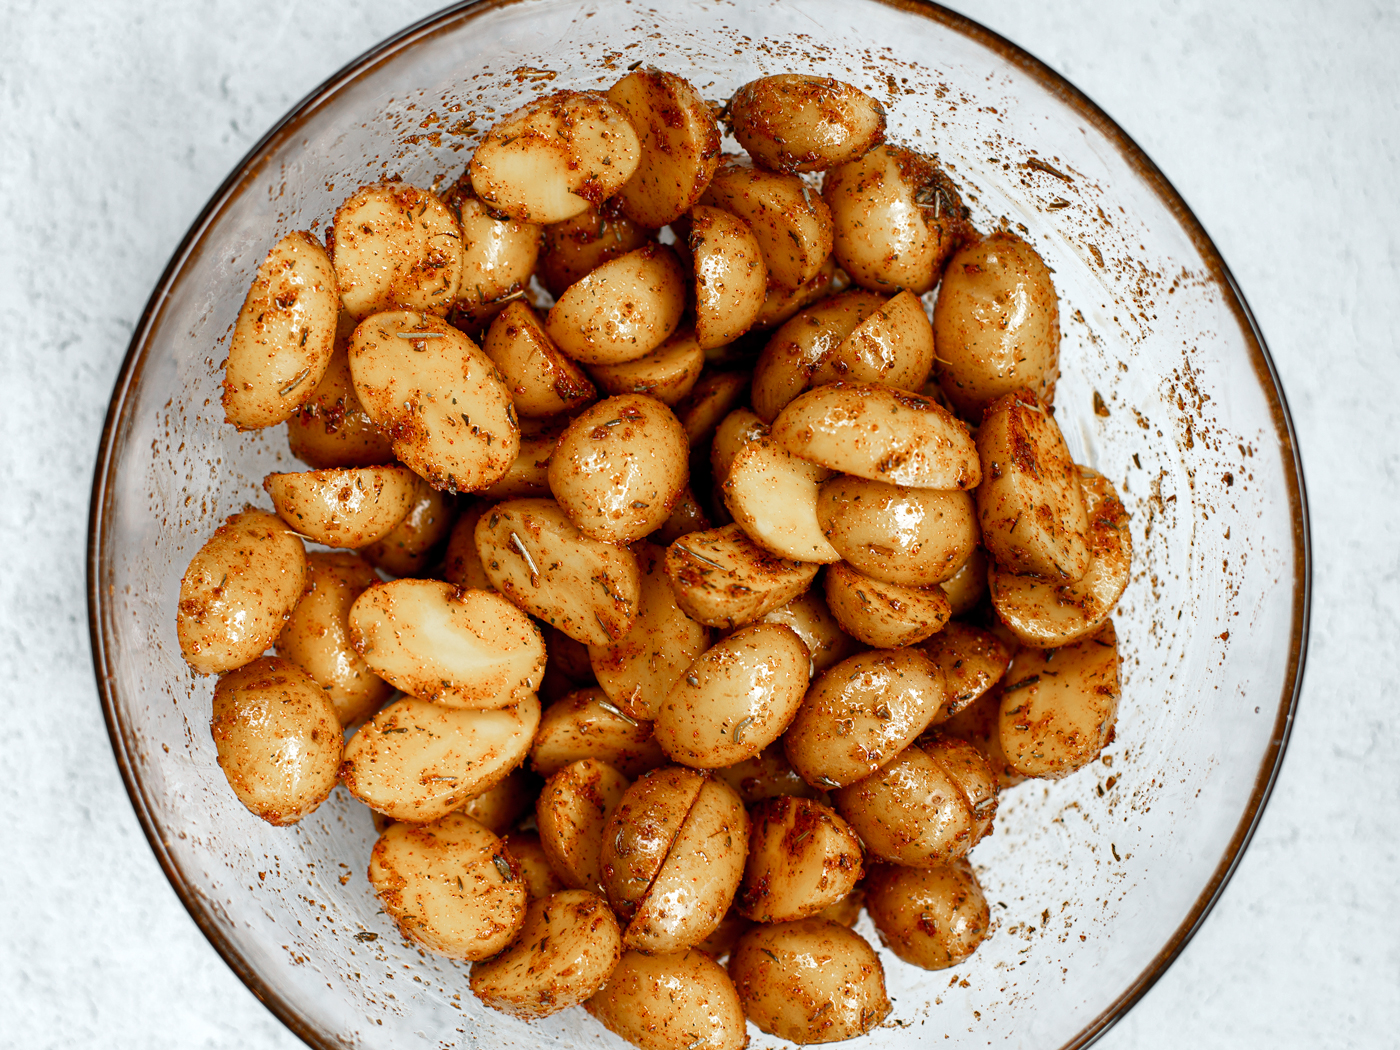 Oiled and seasoned small potatoes in a mixing bowl.